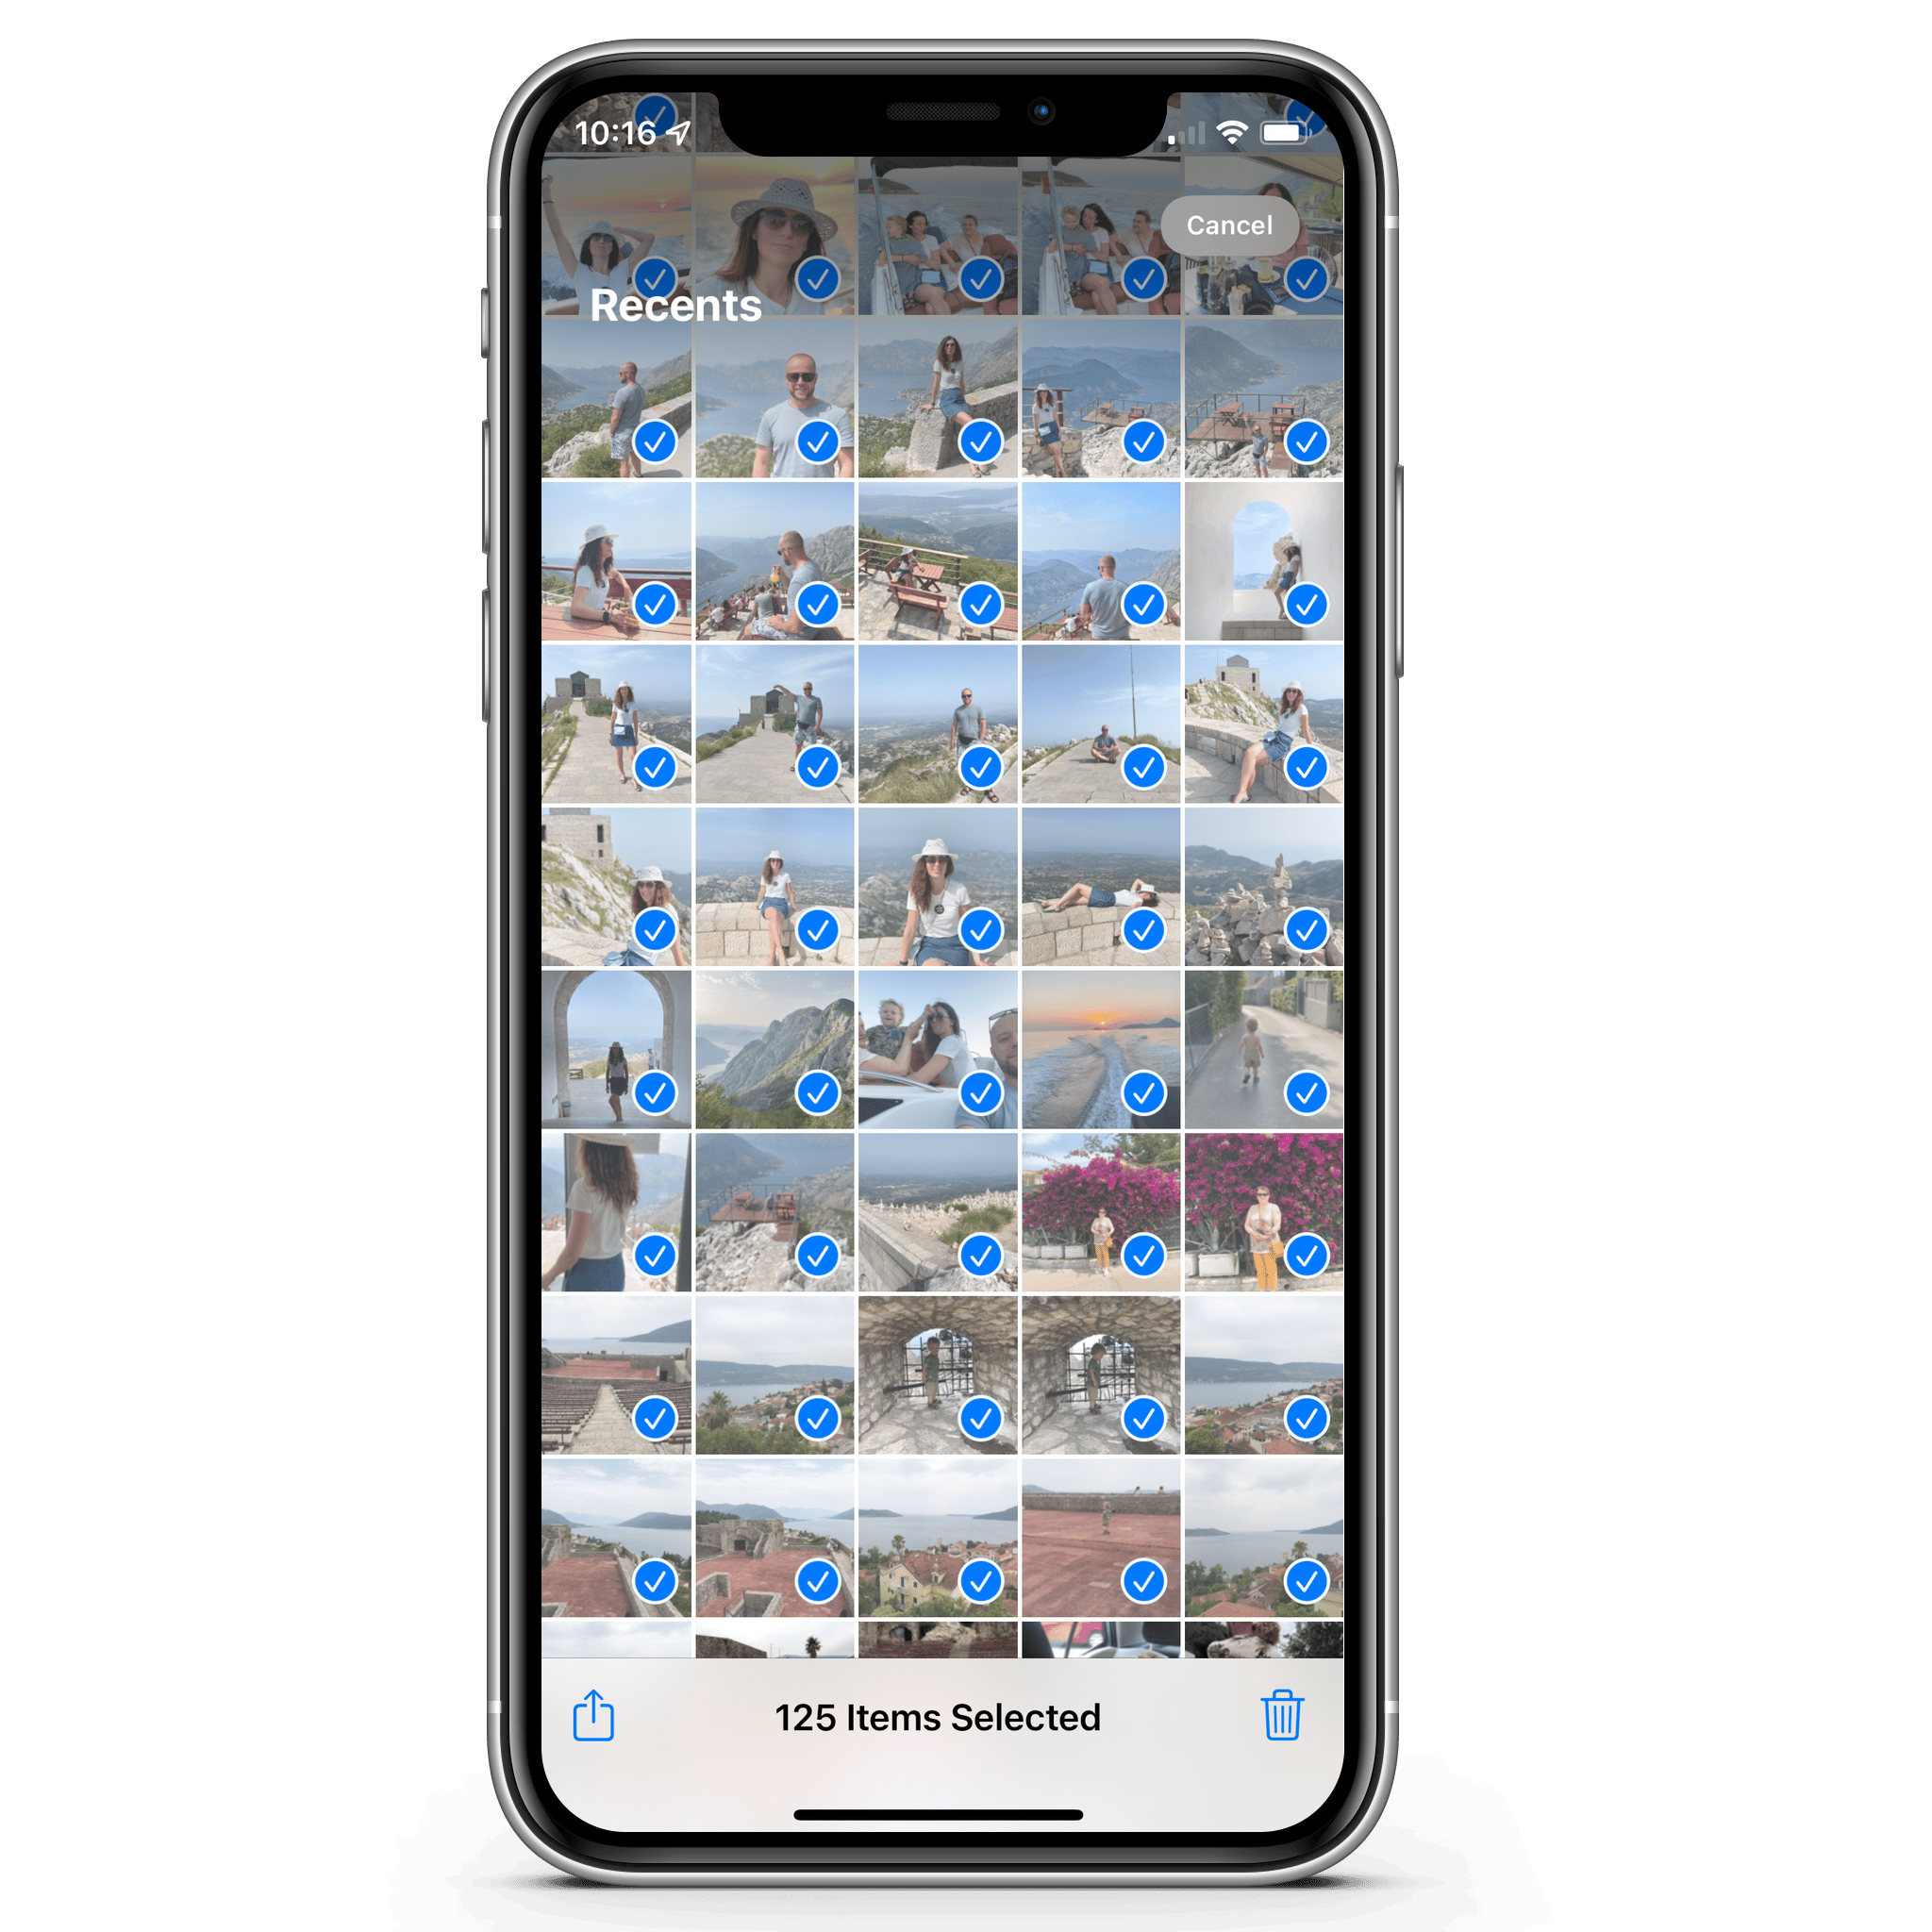 iPnone screen showing how to select all photos